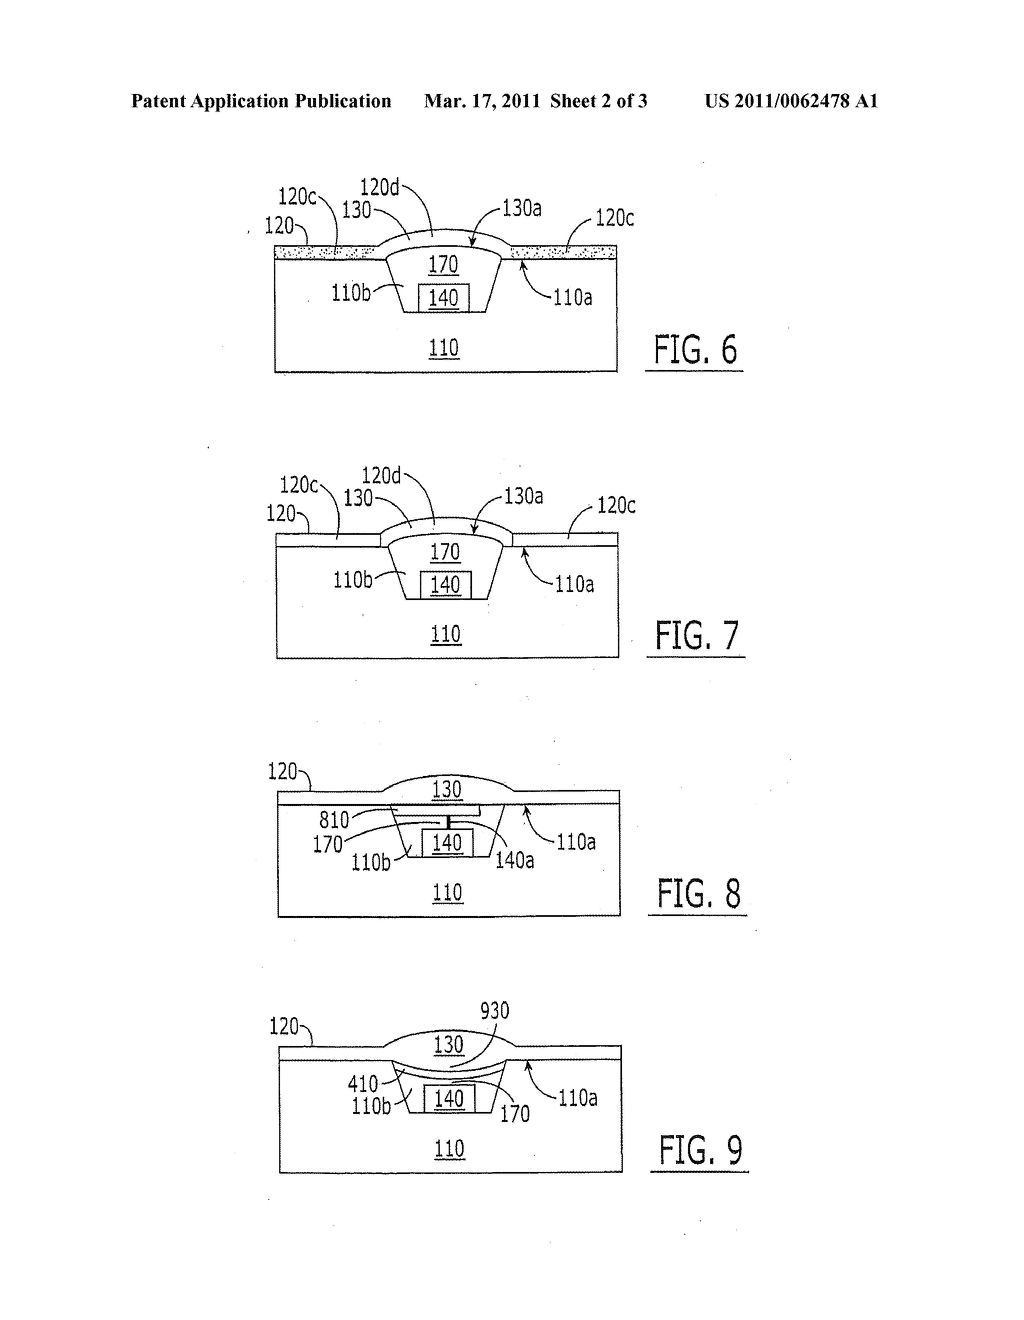 SEMICONDUCTOR LIGHT EMITTING DEVICES INCLUDING FLEXIBLE UNITARY FILM HAVING AN OPTICAL ELEMENT THEREIN - diagram, schematic, and image 03